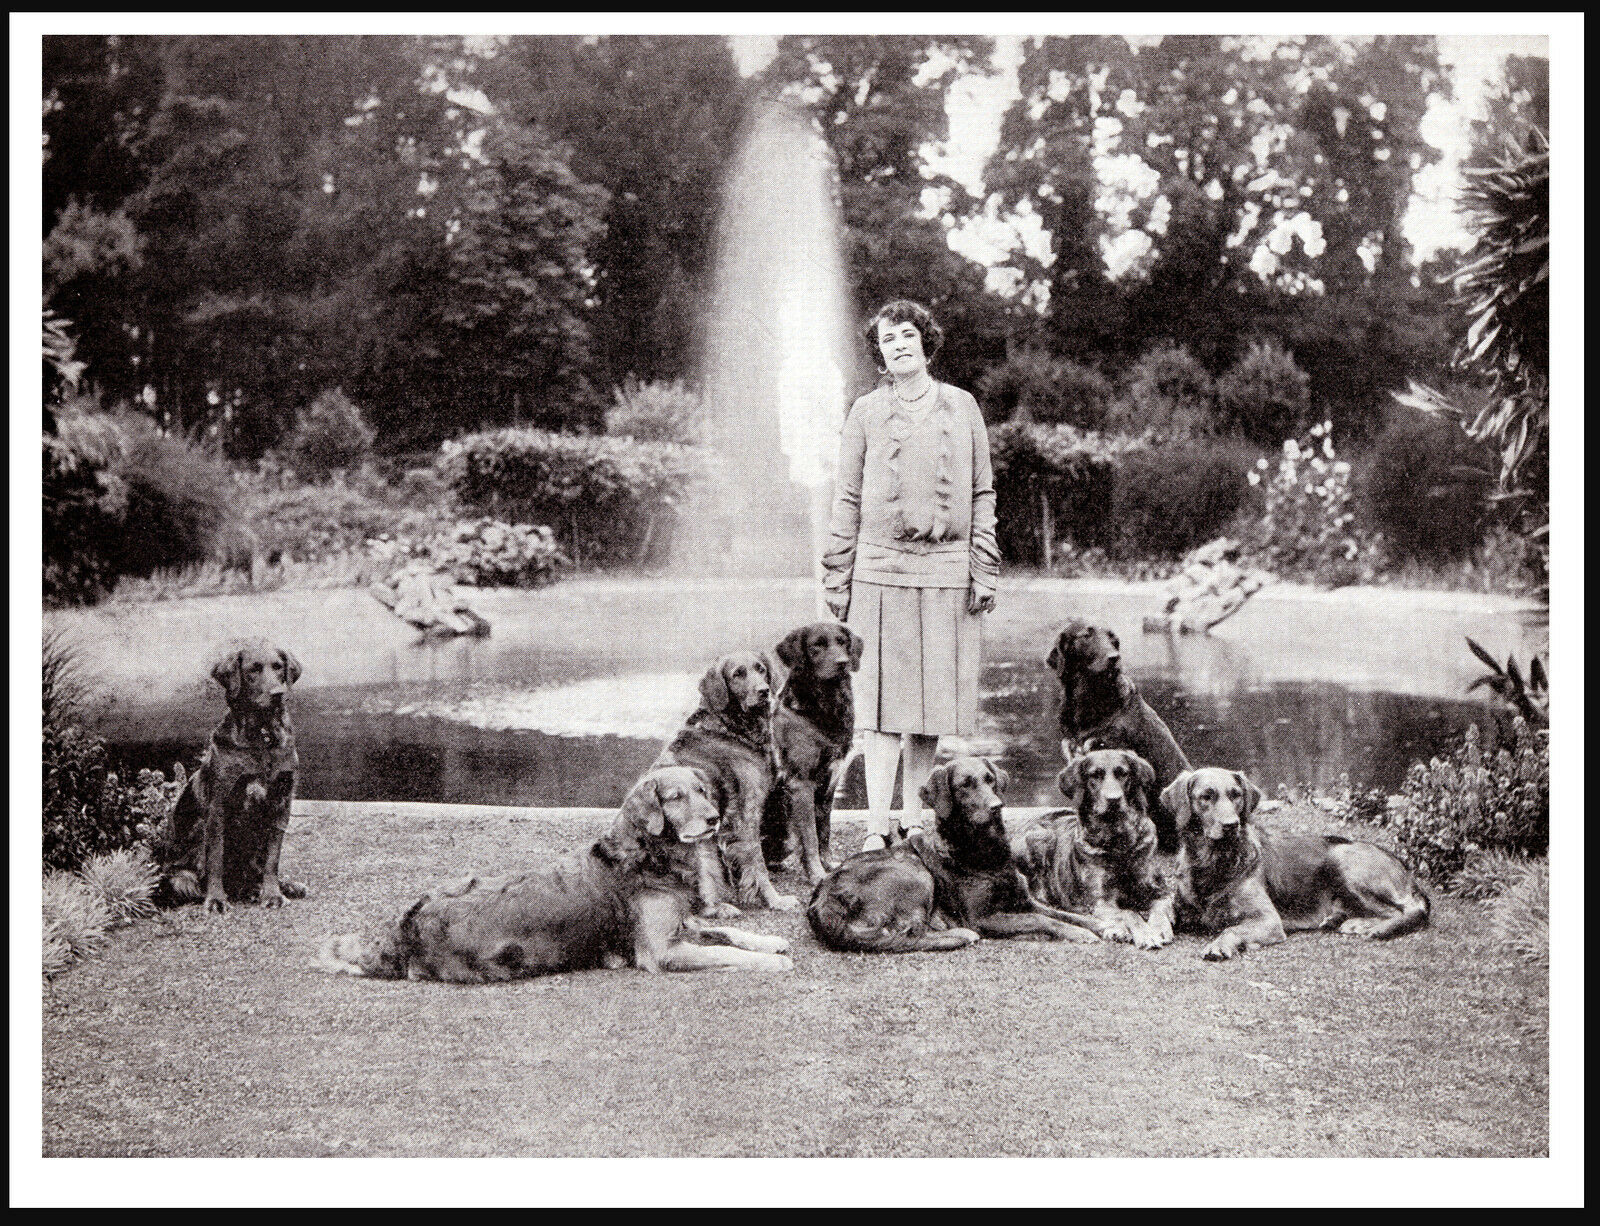 GOLDEN RETRIEVER LADY AND HER DOGS GREAT VINTAGE STYLE DOG PHOTO PRINT POSTER